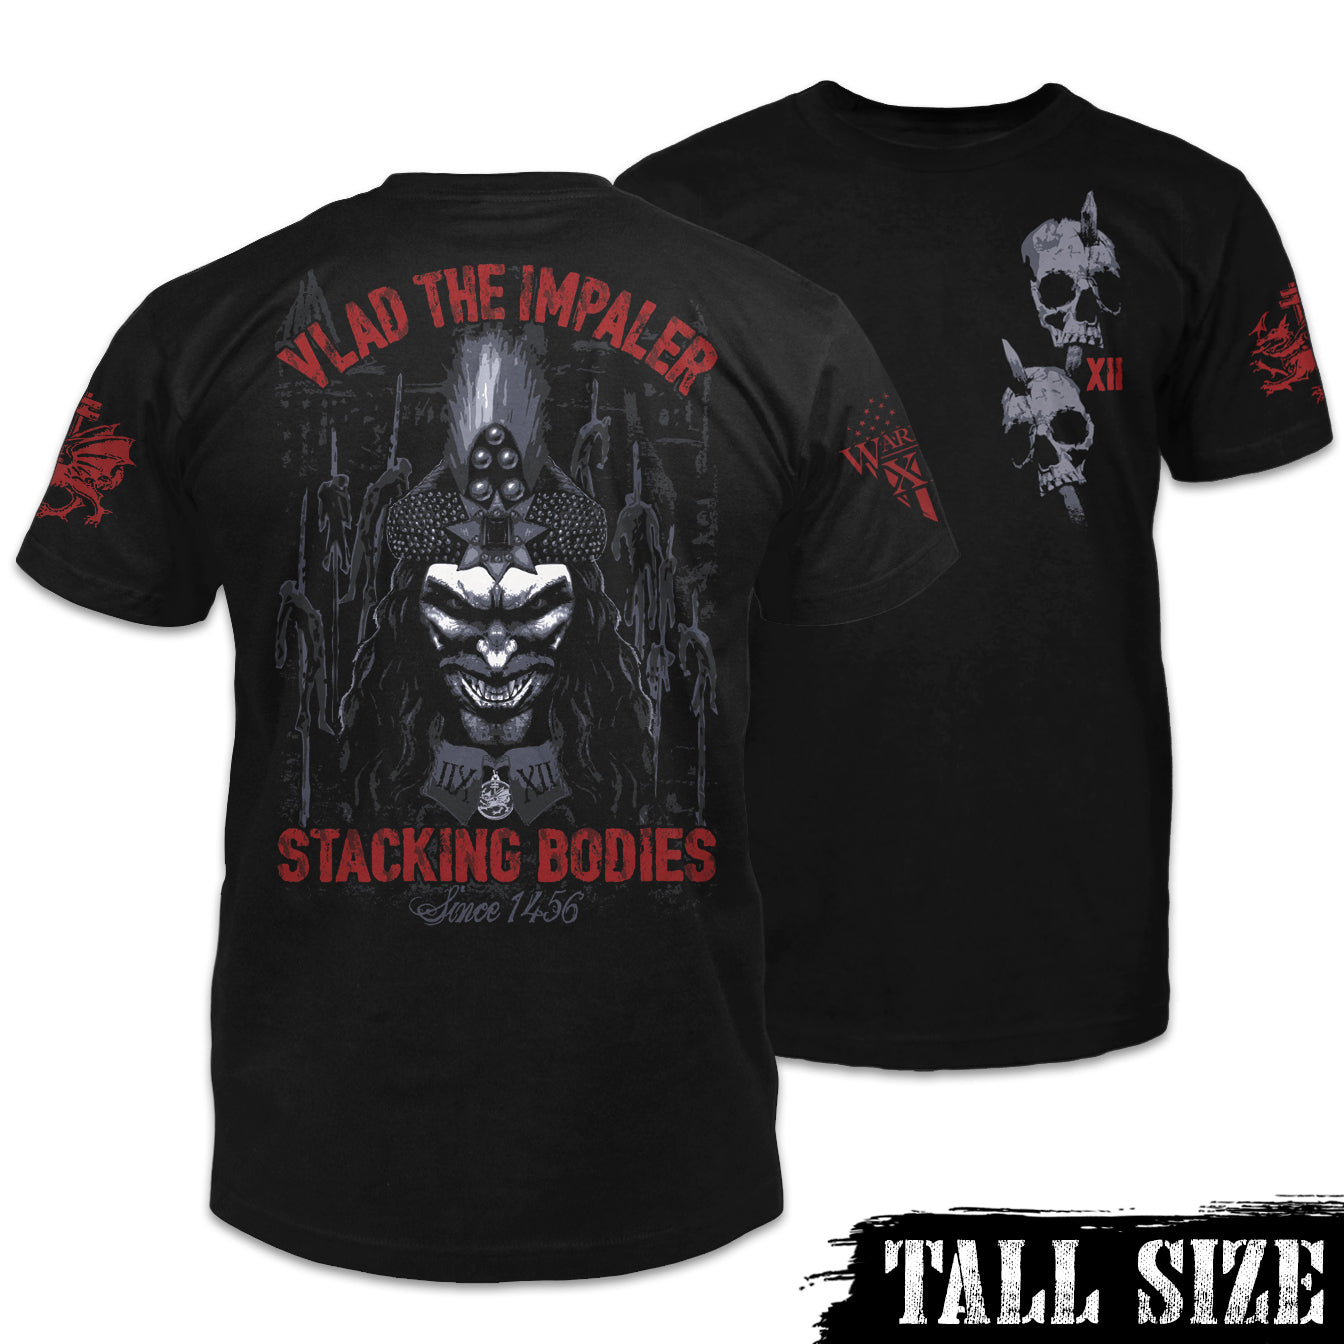 Front & back black tall size shirt with the words "Vlad The Impaler, Stacking bodies since 1456" with a Vlad printed on the shirt.